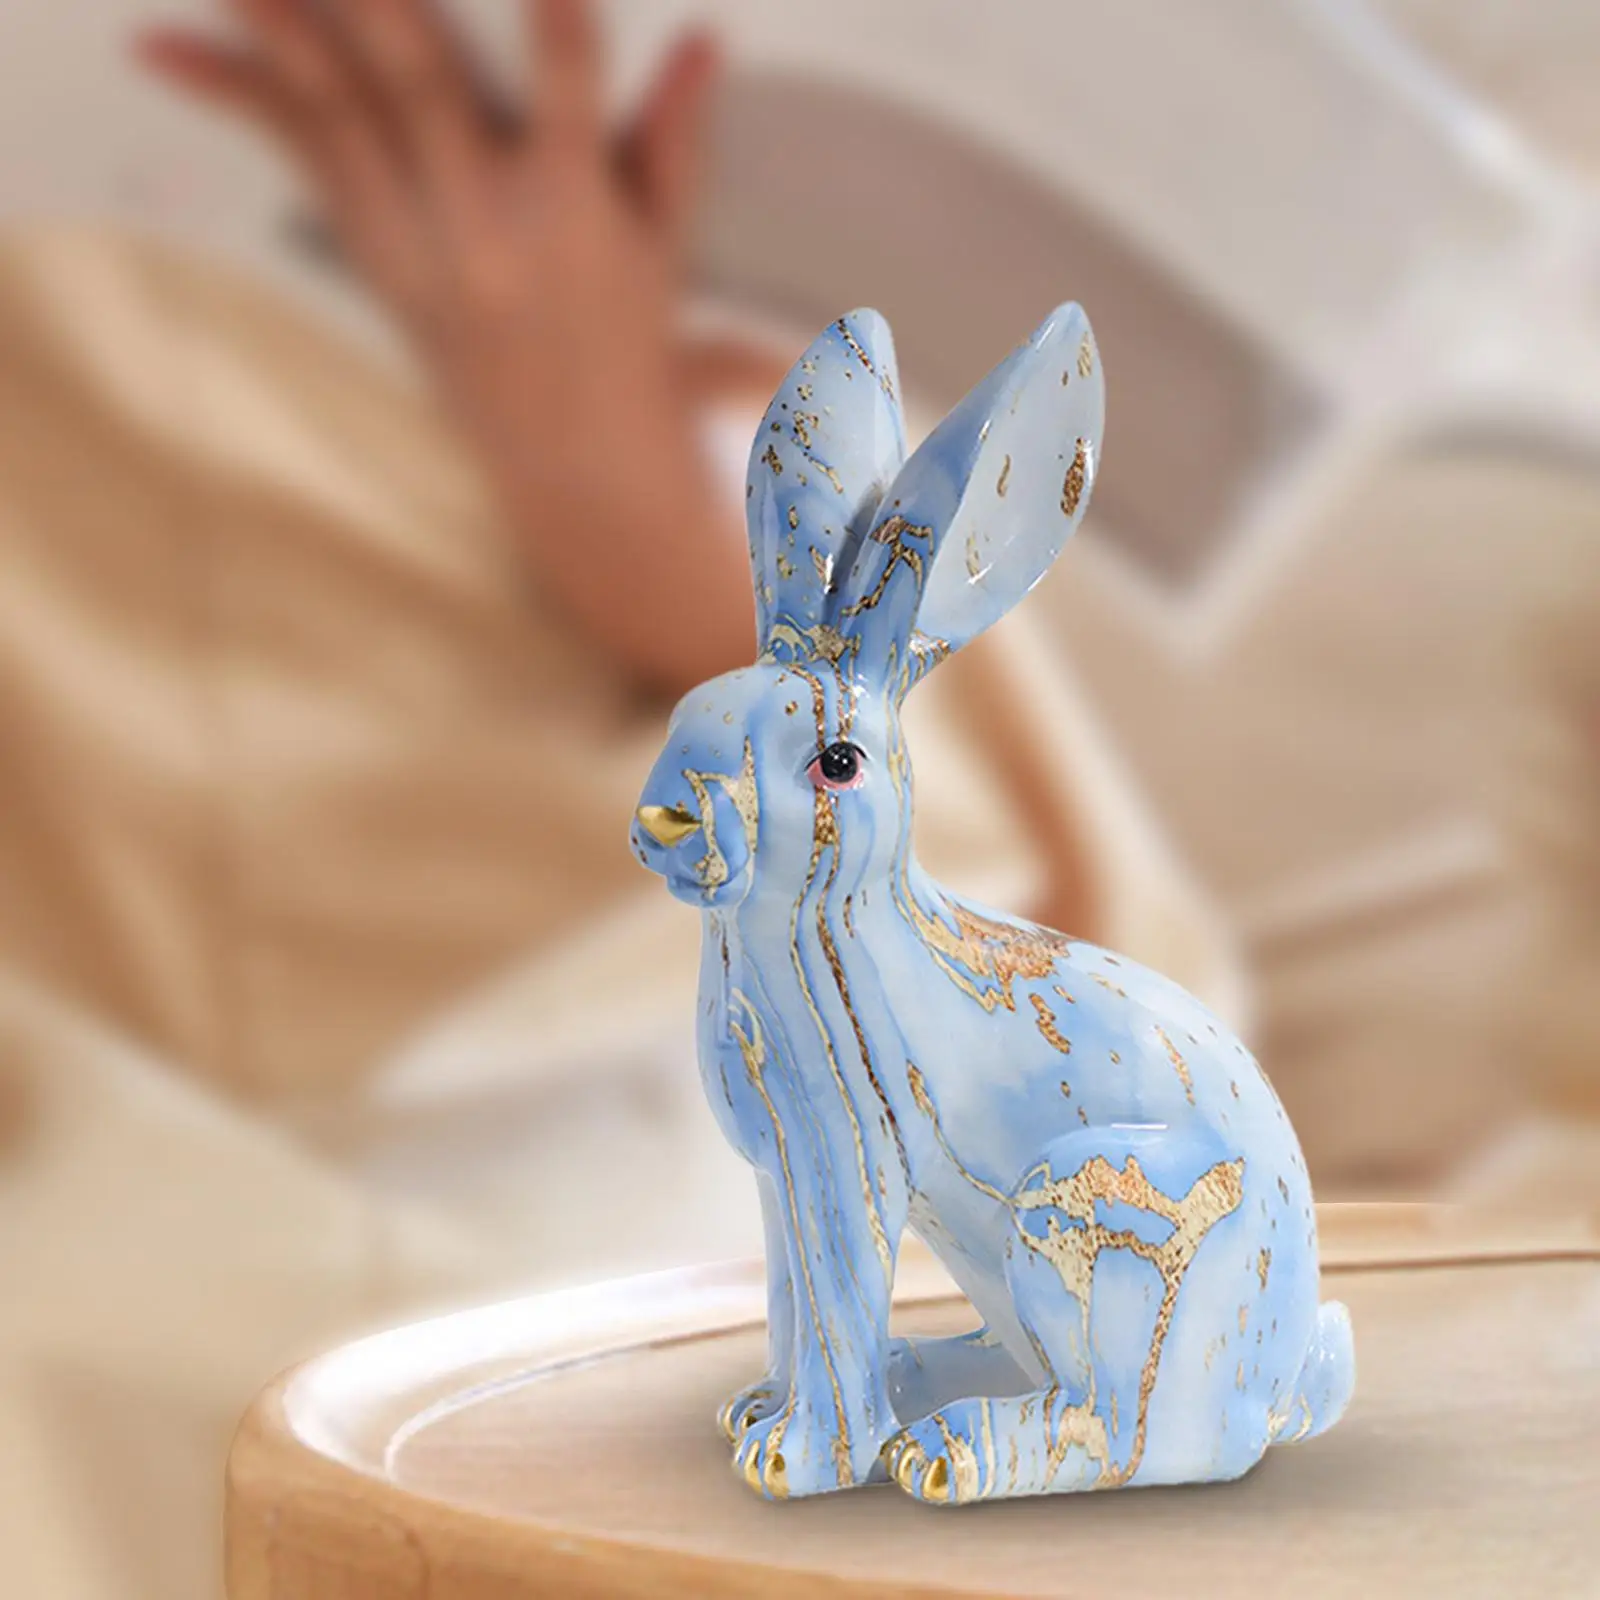 Resin Bunny Rabbits Figurine Rabbit Decor, Modern Art Home Decoration, Weddings Crafts Gifts, Statues for Home Decor